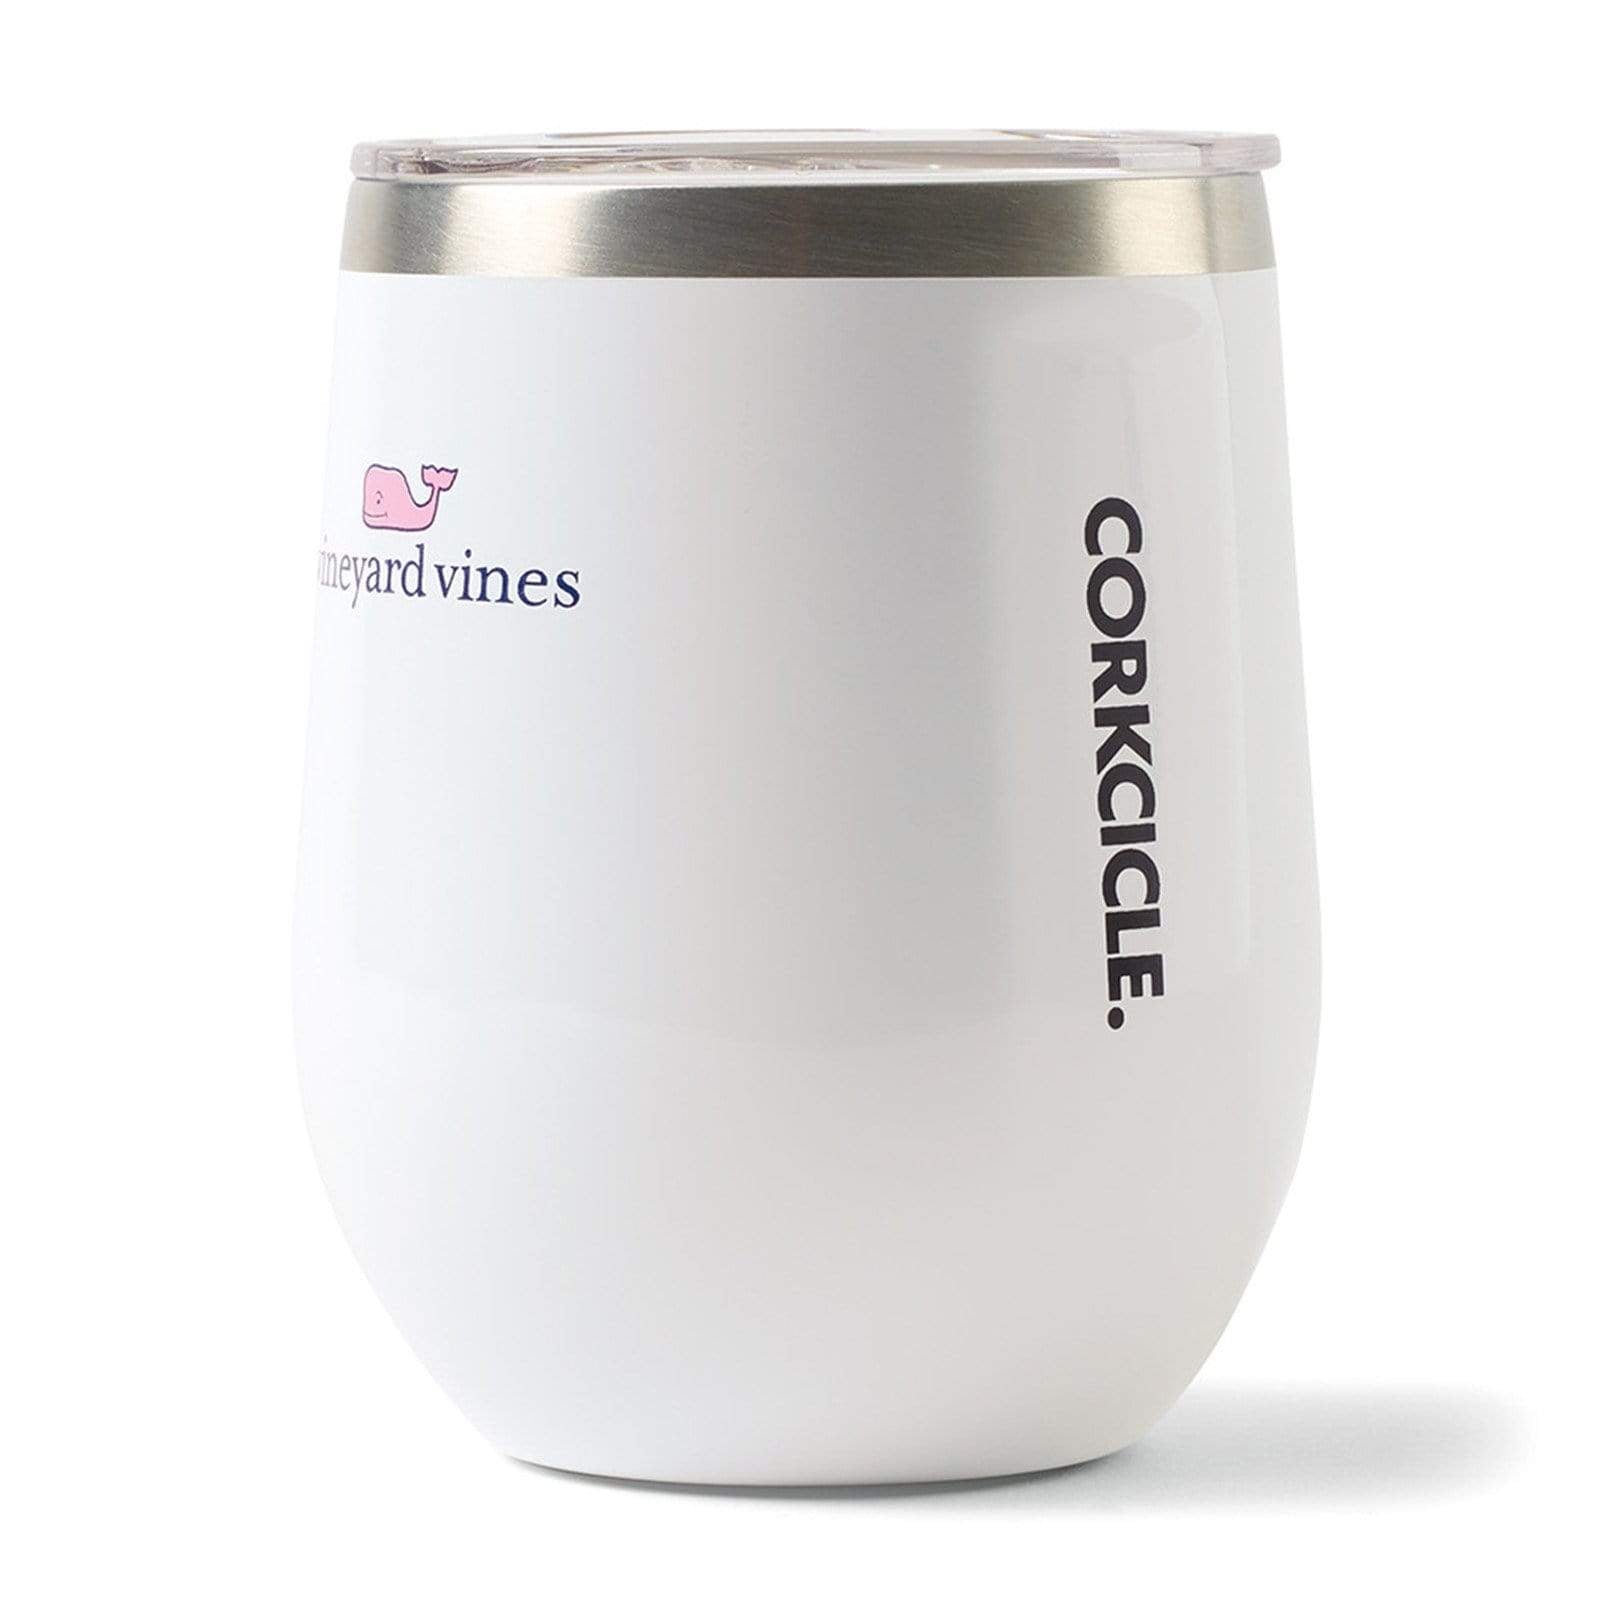 Two Corkcicle 12 oz Stainless Steel Wine Tumblers w/ Lids